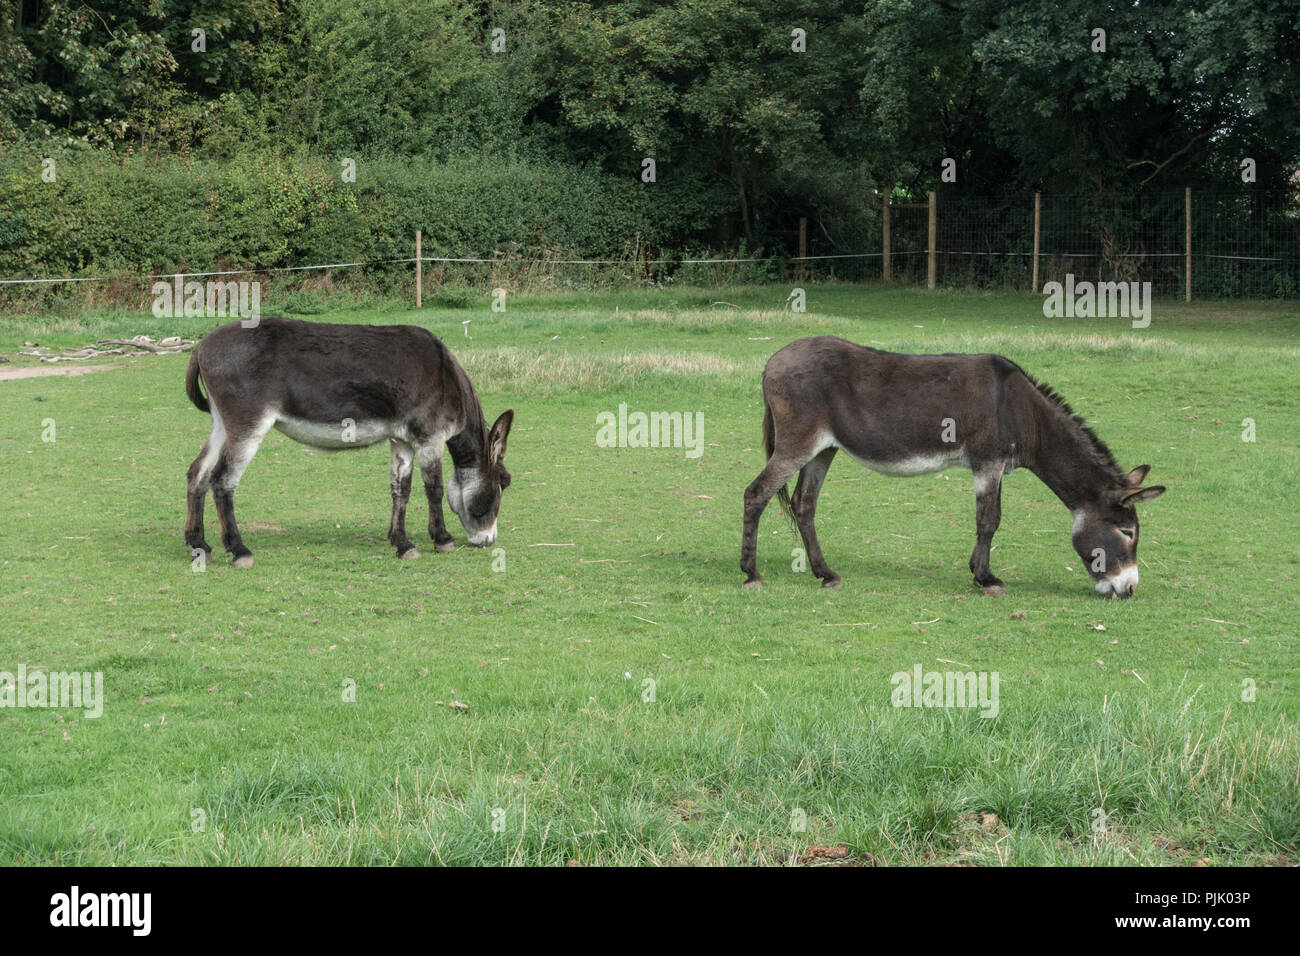 two donkeys grazing in a field at the zoo Stock Photo